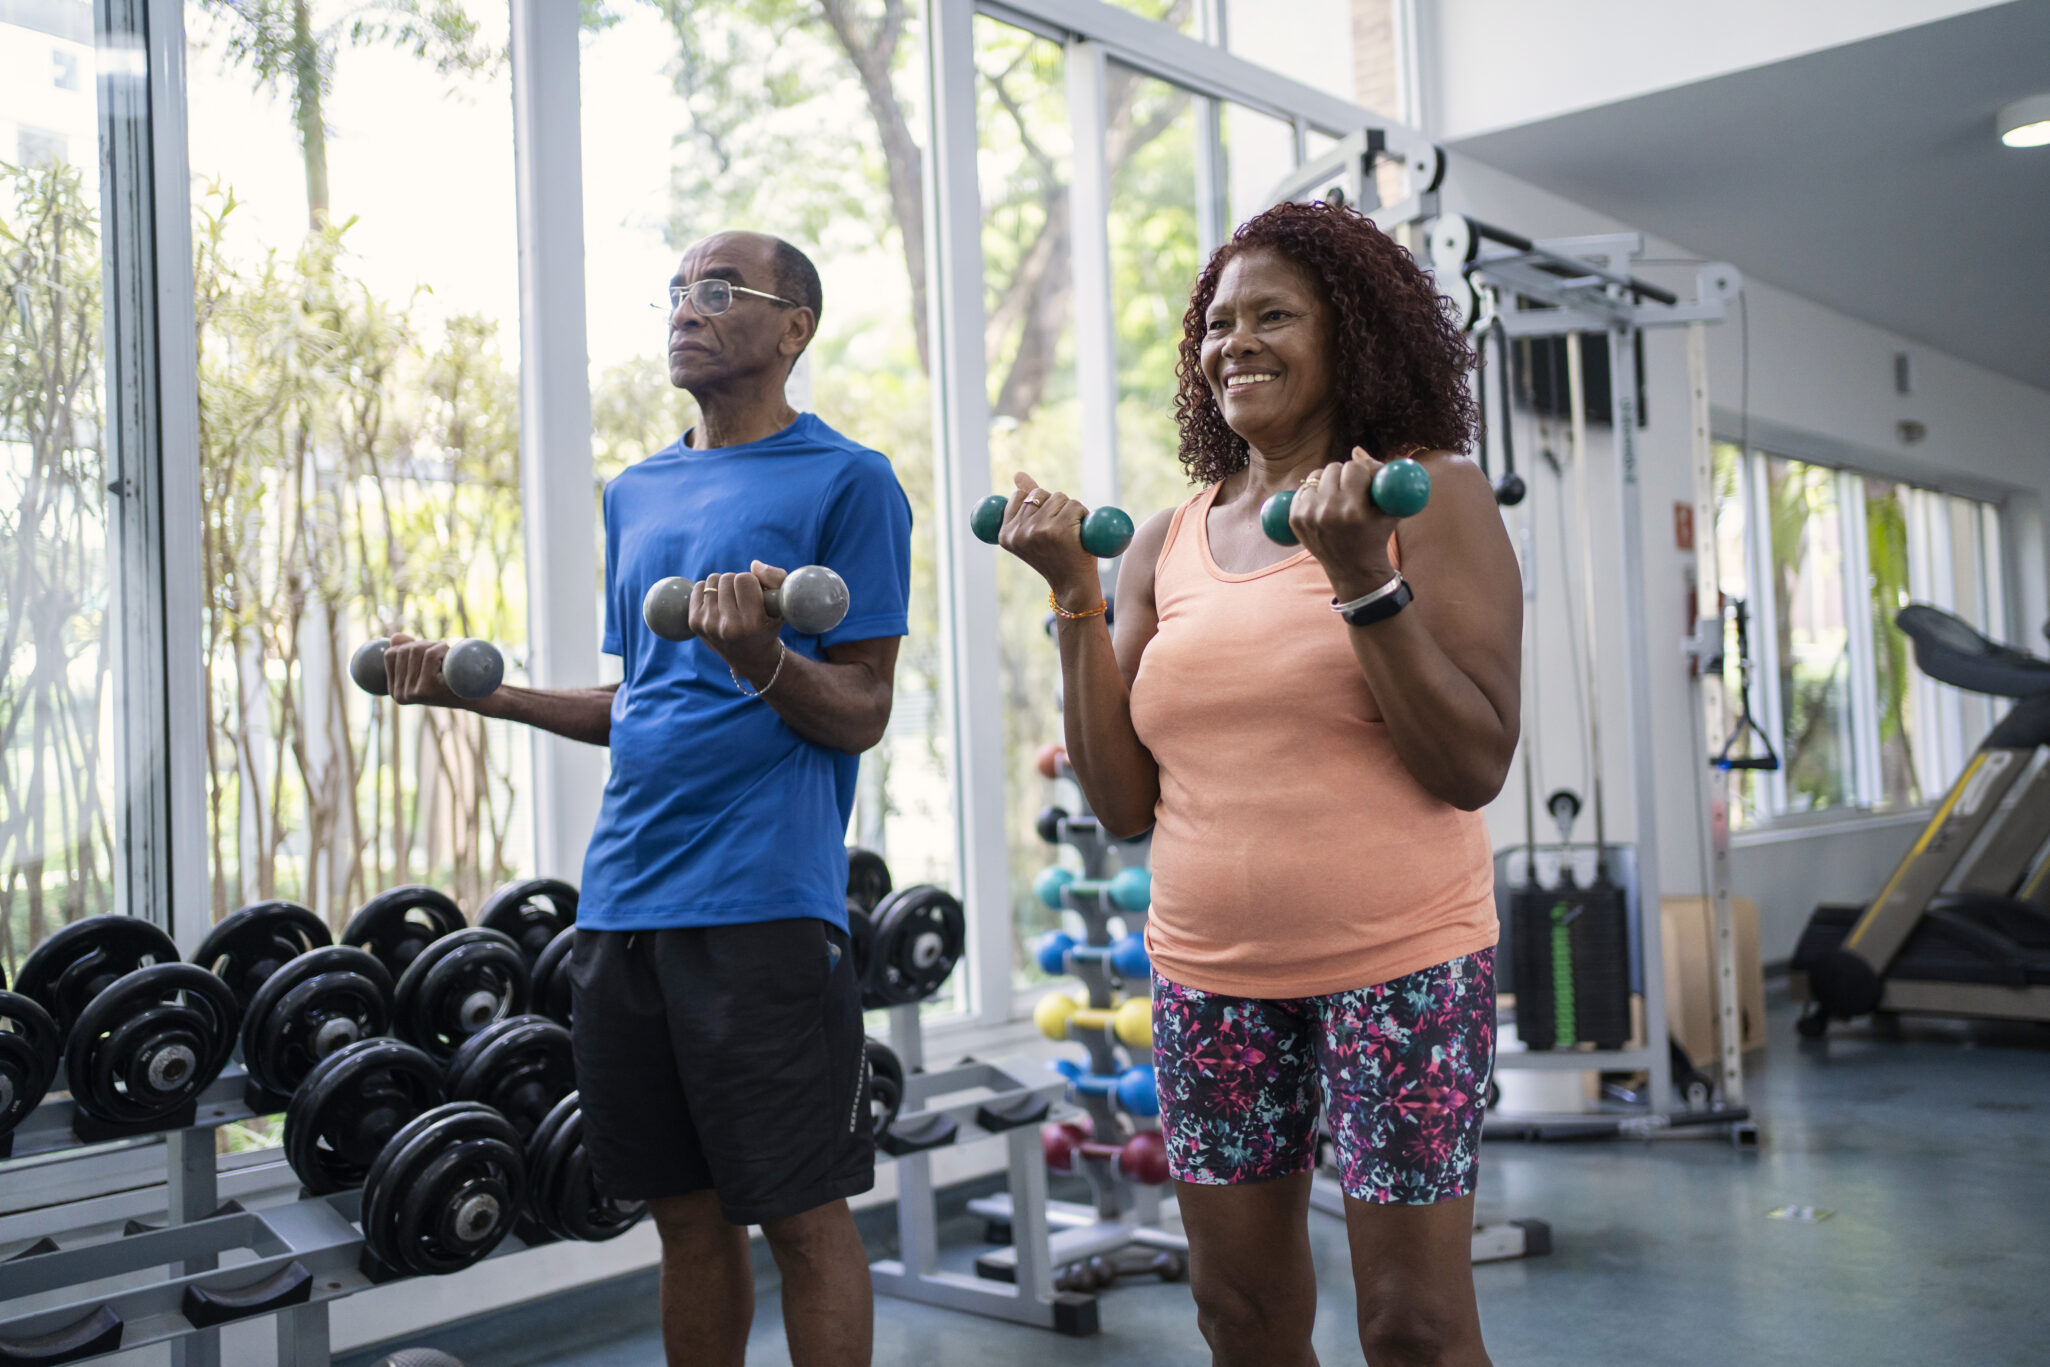 An older man and older woman lift hand weights in the gym